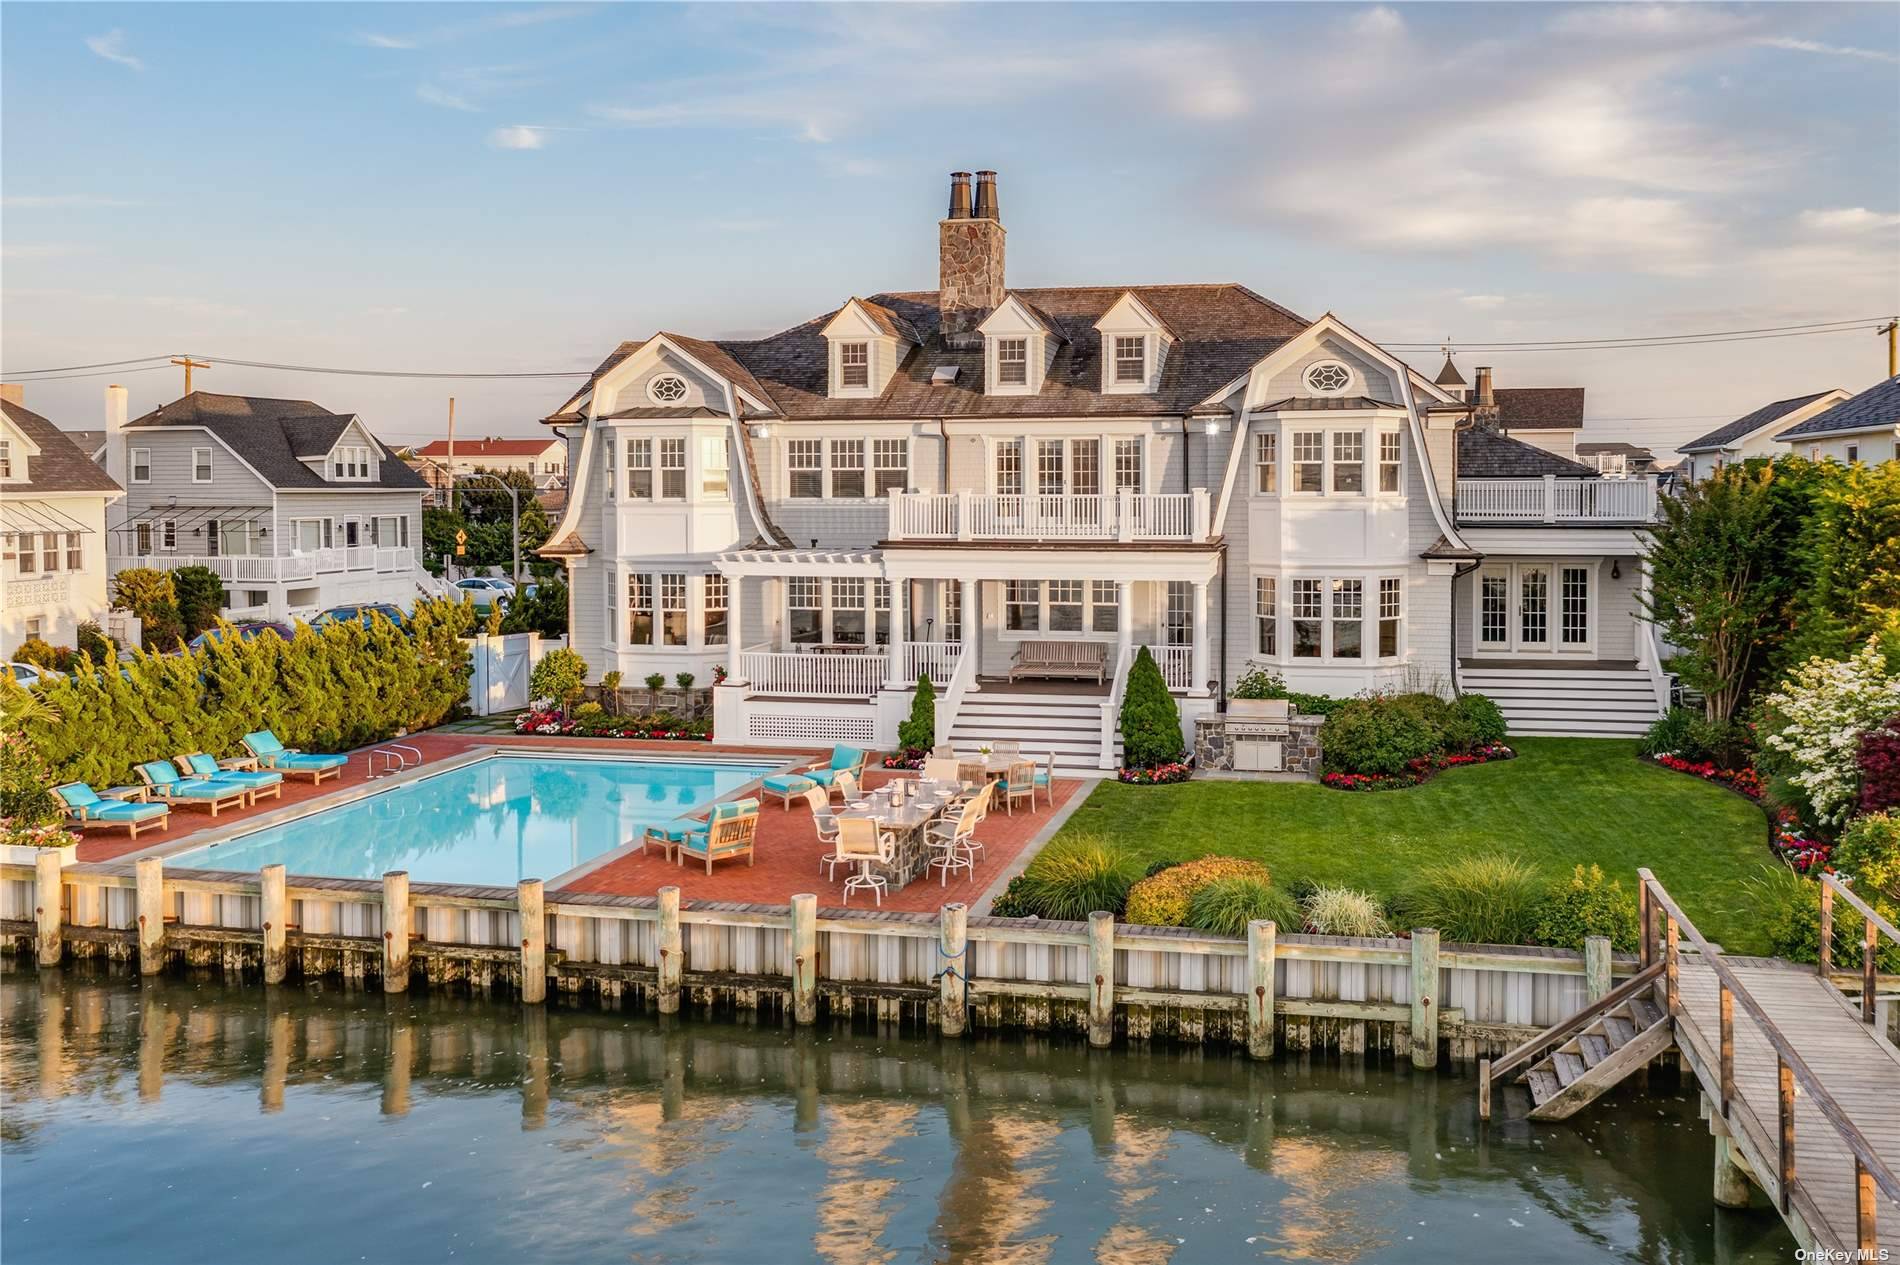 Water Front Property ! This Hamptons style architectural masterpiece offers stunning views of the Manhattan skyline and breathtaking sunsets.